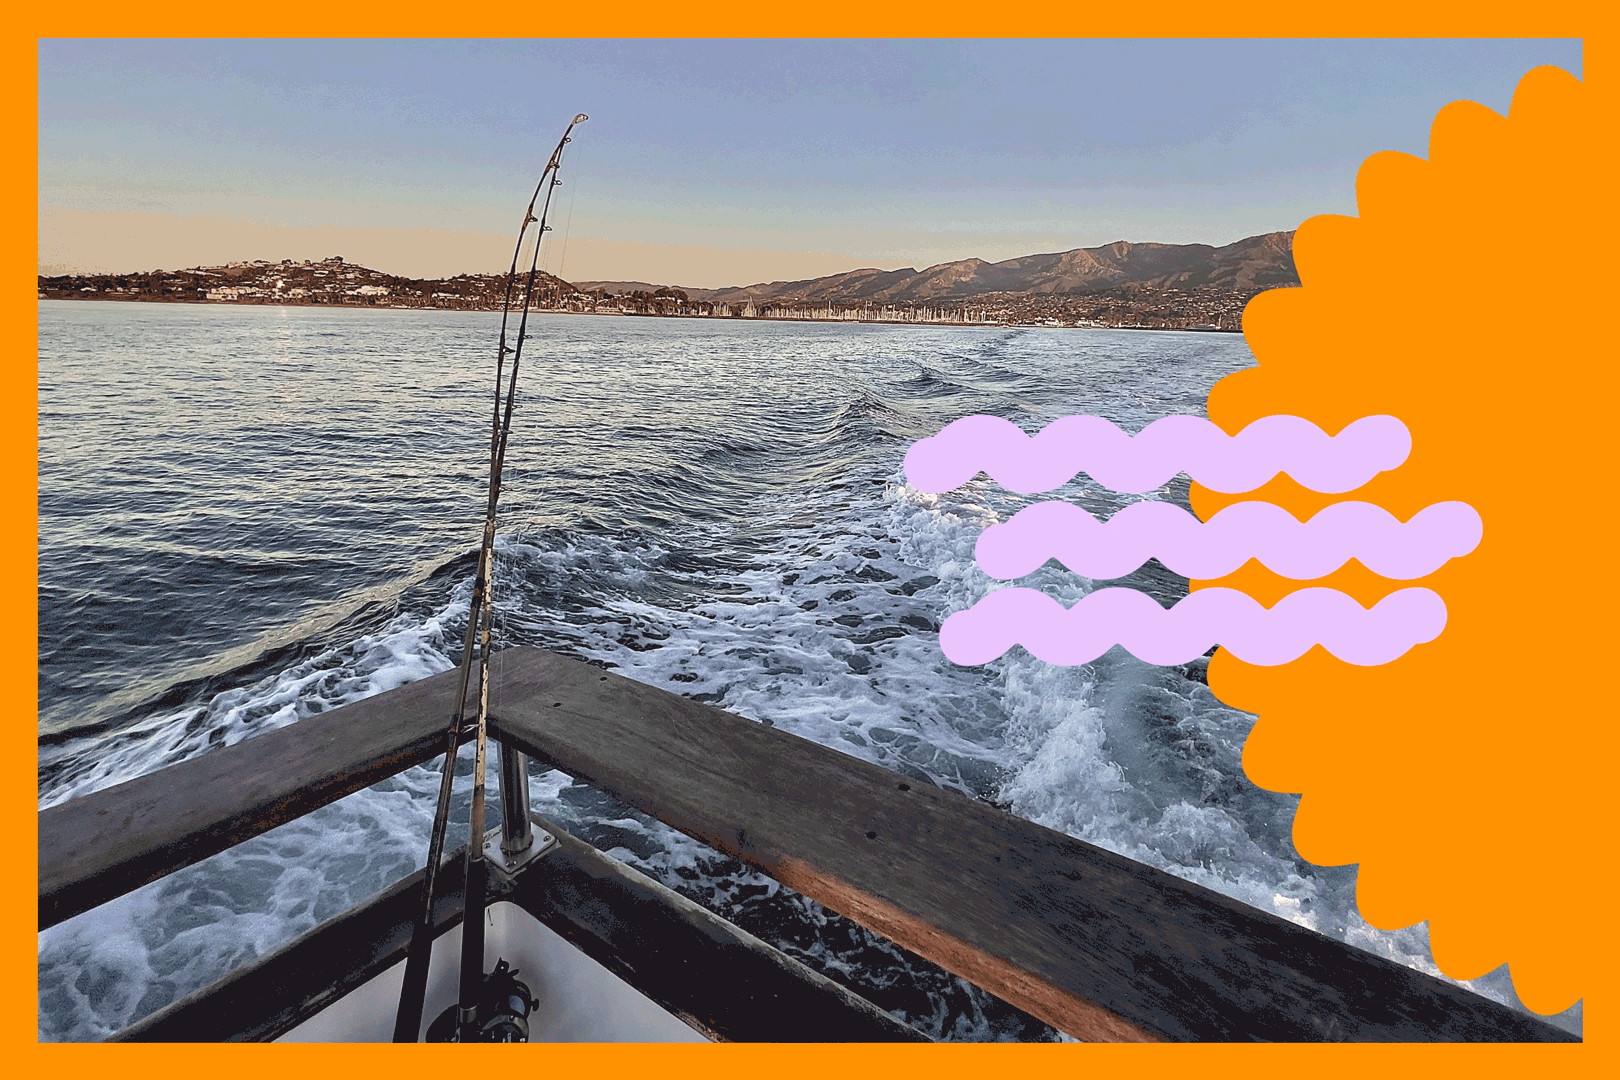 A view of the shoreline from the front of a boat. A fishing rod rests against the boat's rails.